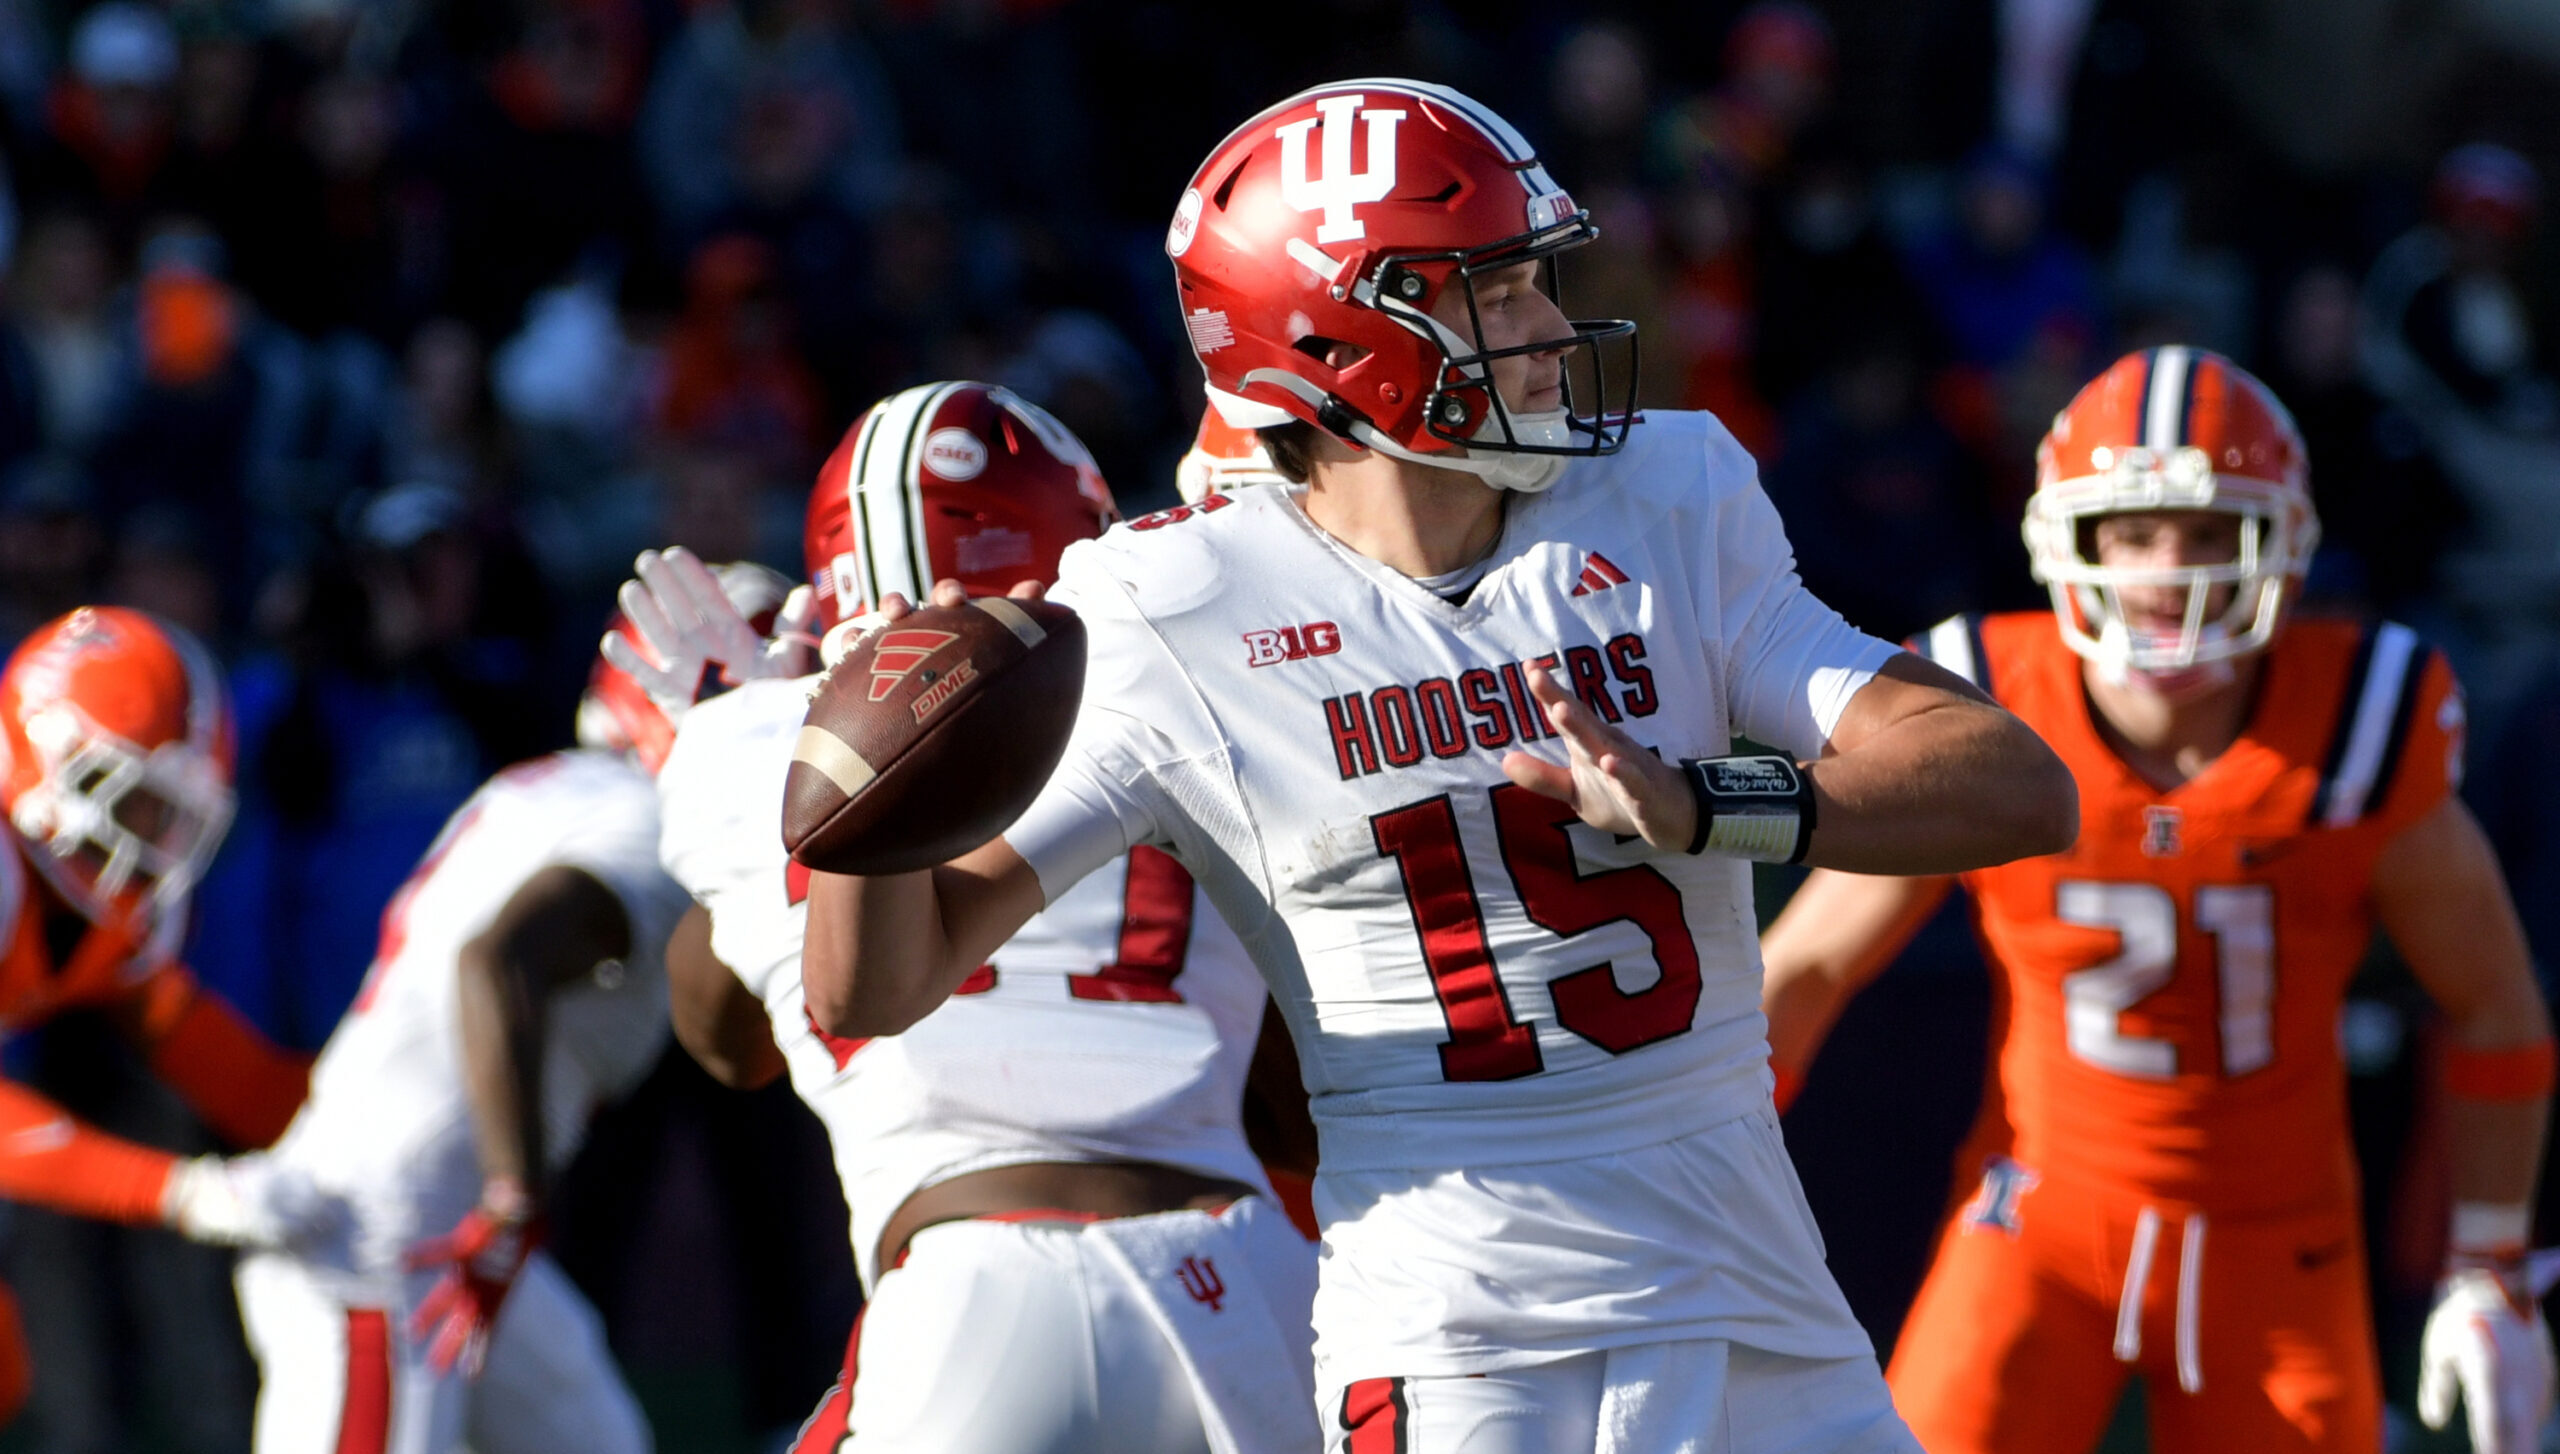 Indiana football fell to Illinois 46-45 in overtime on Saturday.